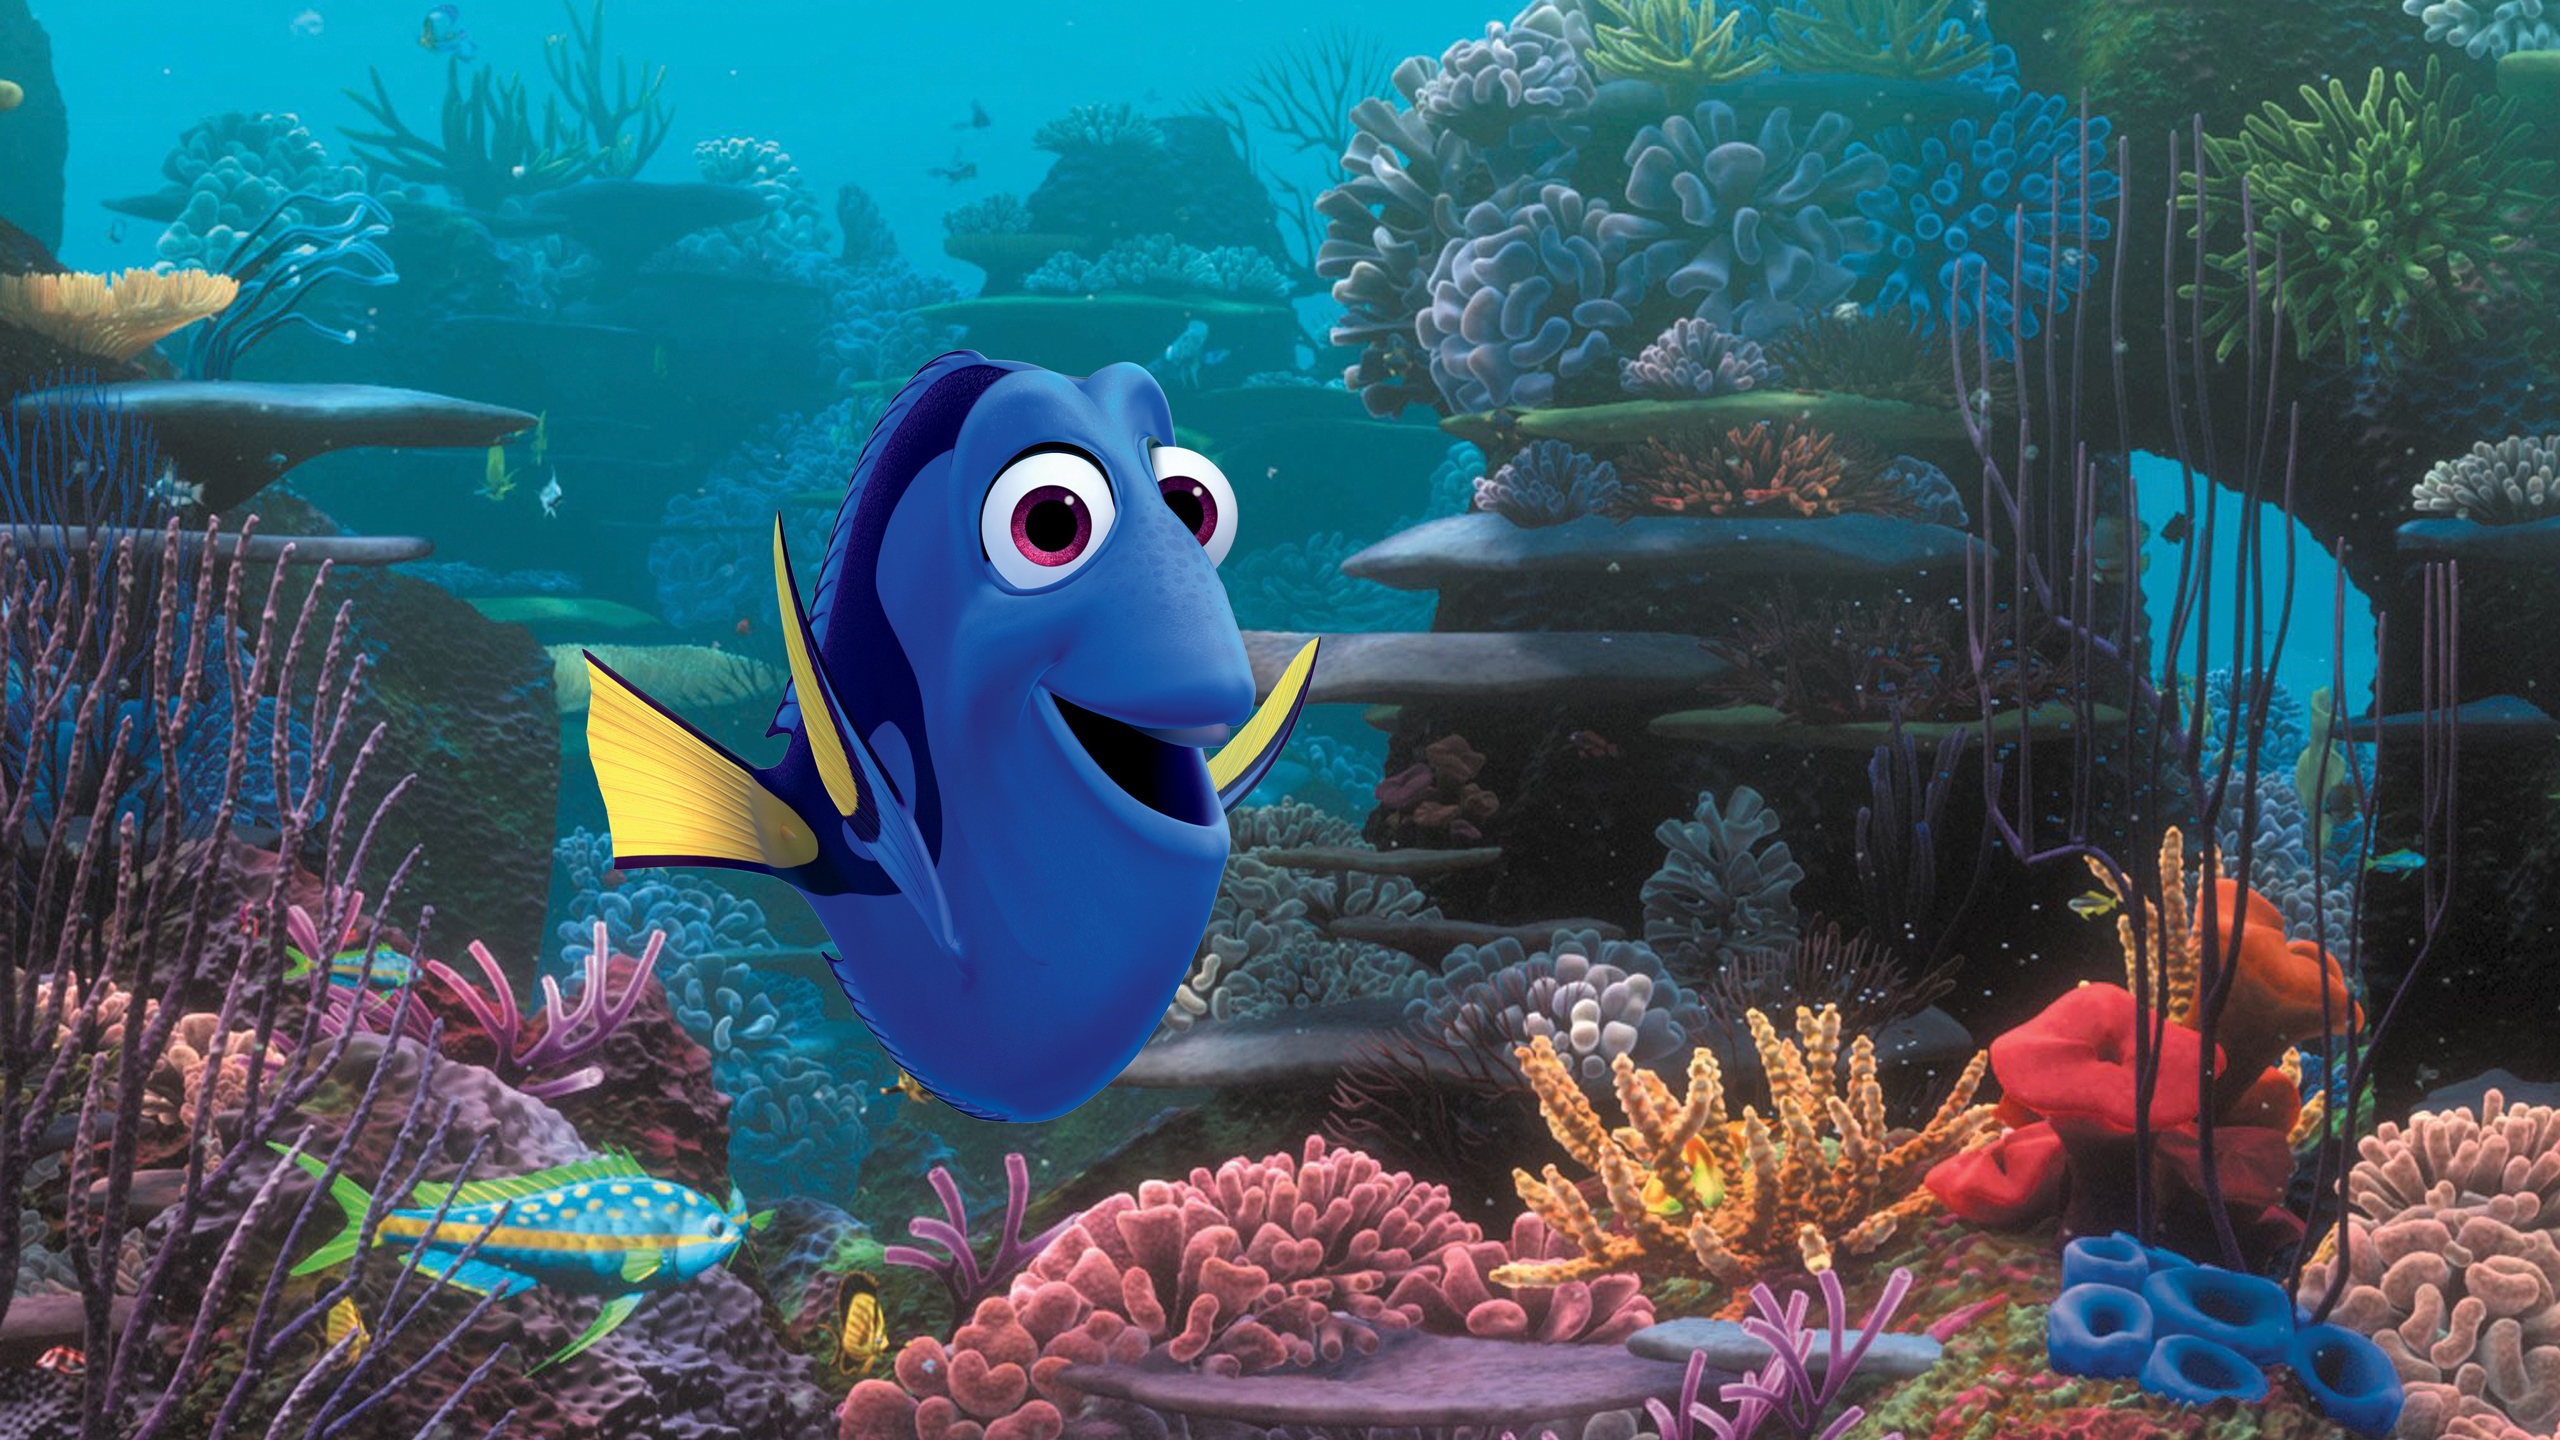 Dory, voiced by Ellen DeGeneres, in a scene from the Pixar sequel 